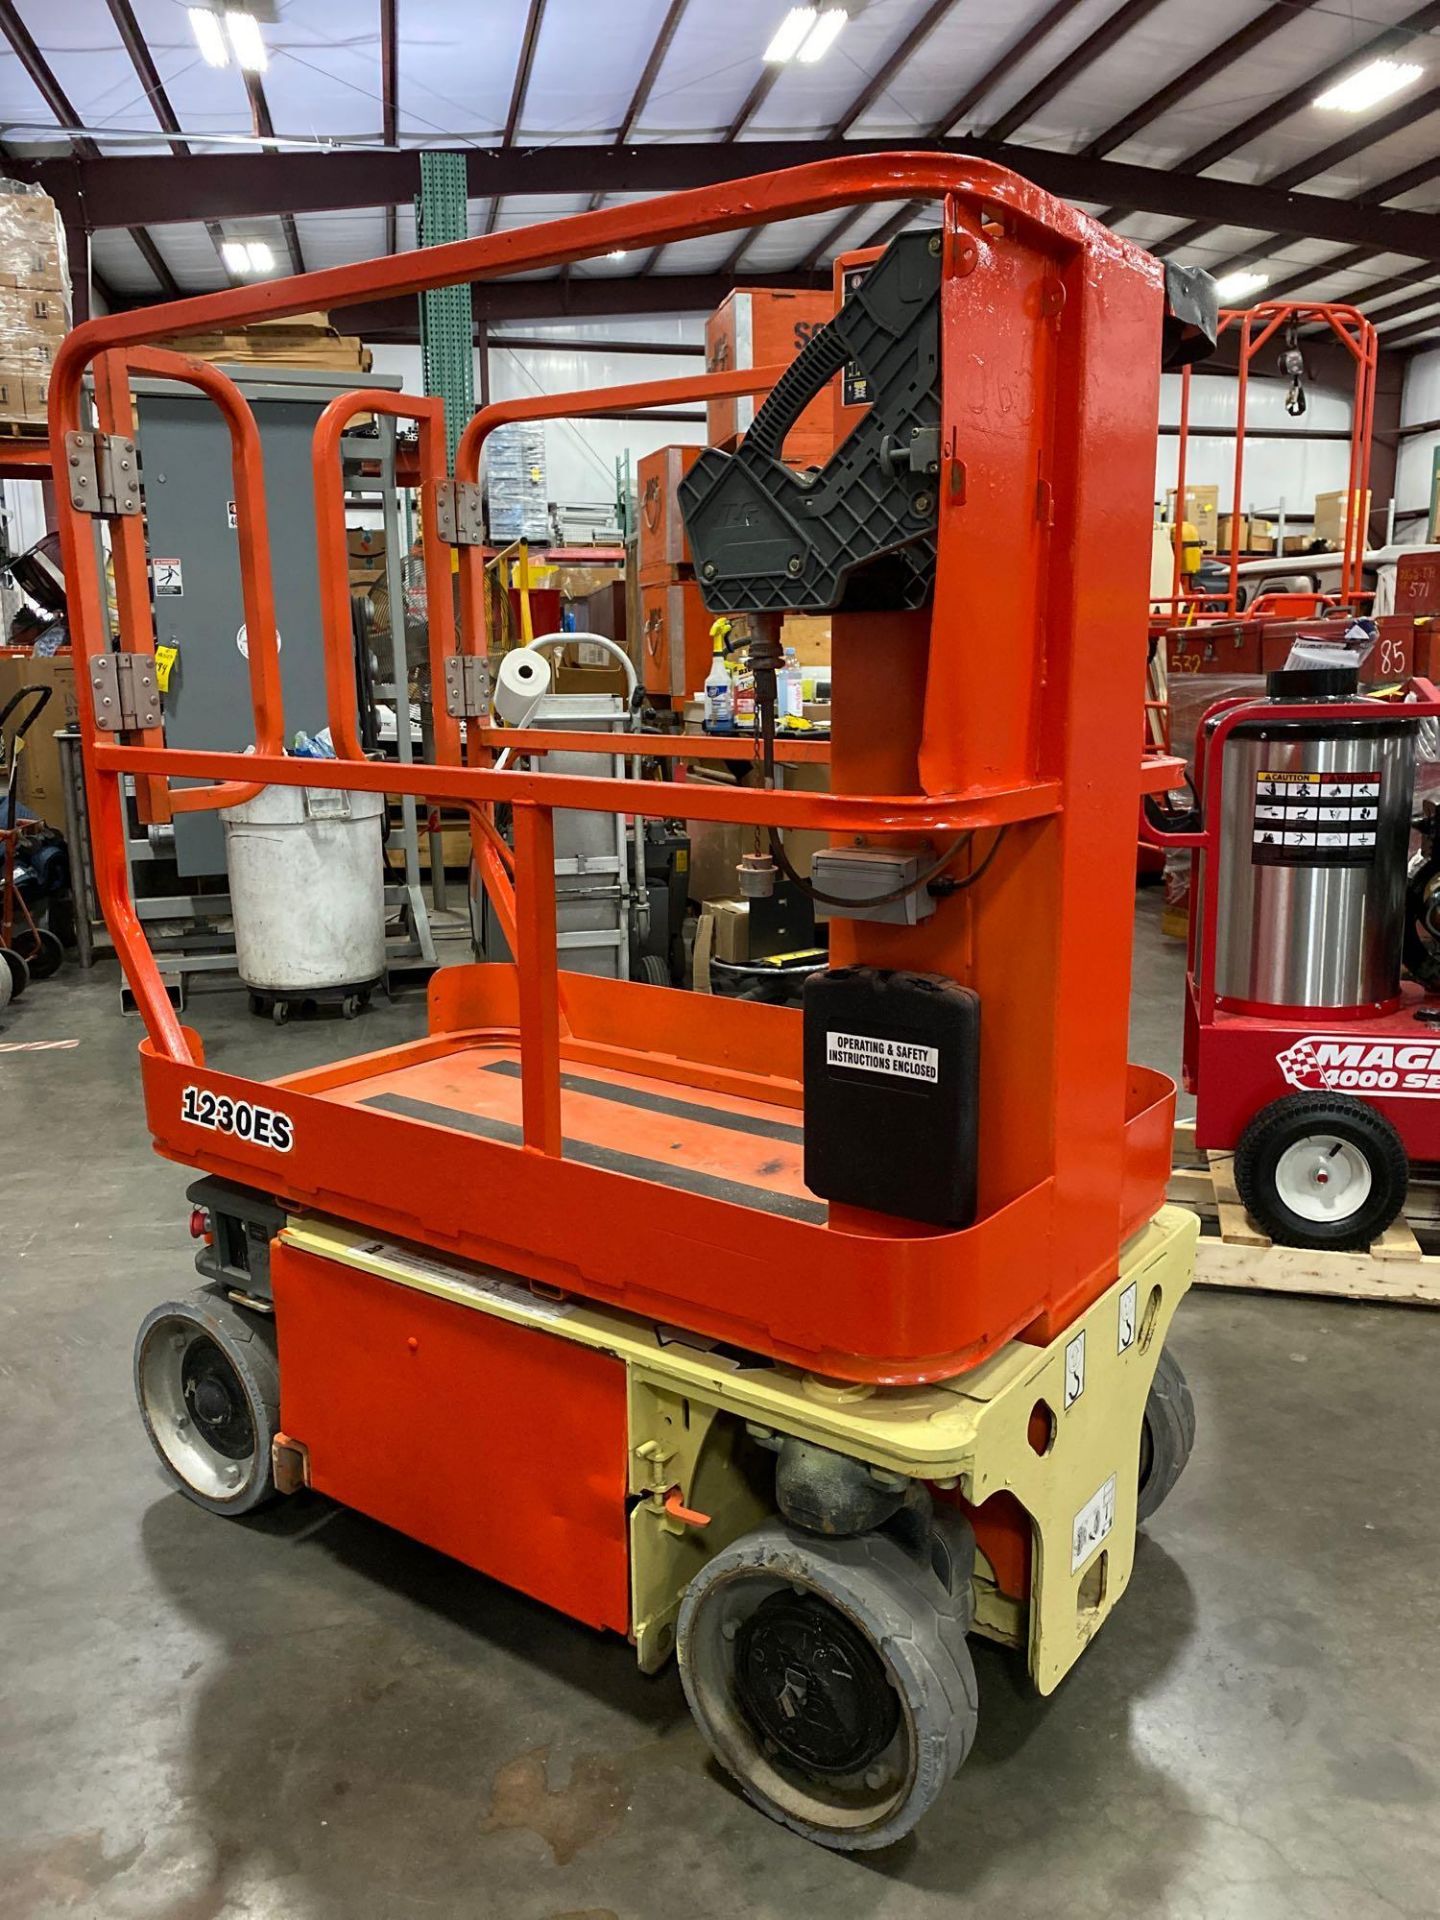 JLG 1230 ES ELECTRIC MAN LIFT, SELF PROPELLED, BUILT IN BATTERY CHARGER, 12' PLATFORM HEIGHT, APPROX - Image 4 of 7